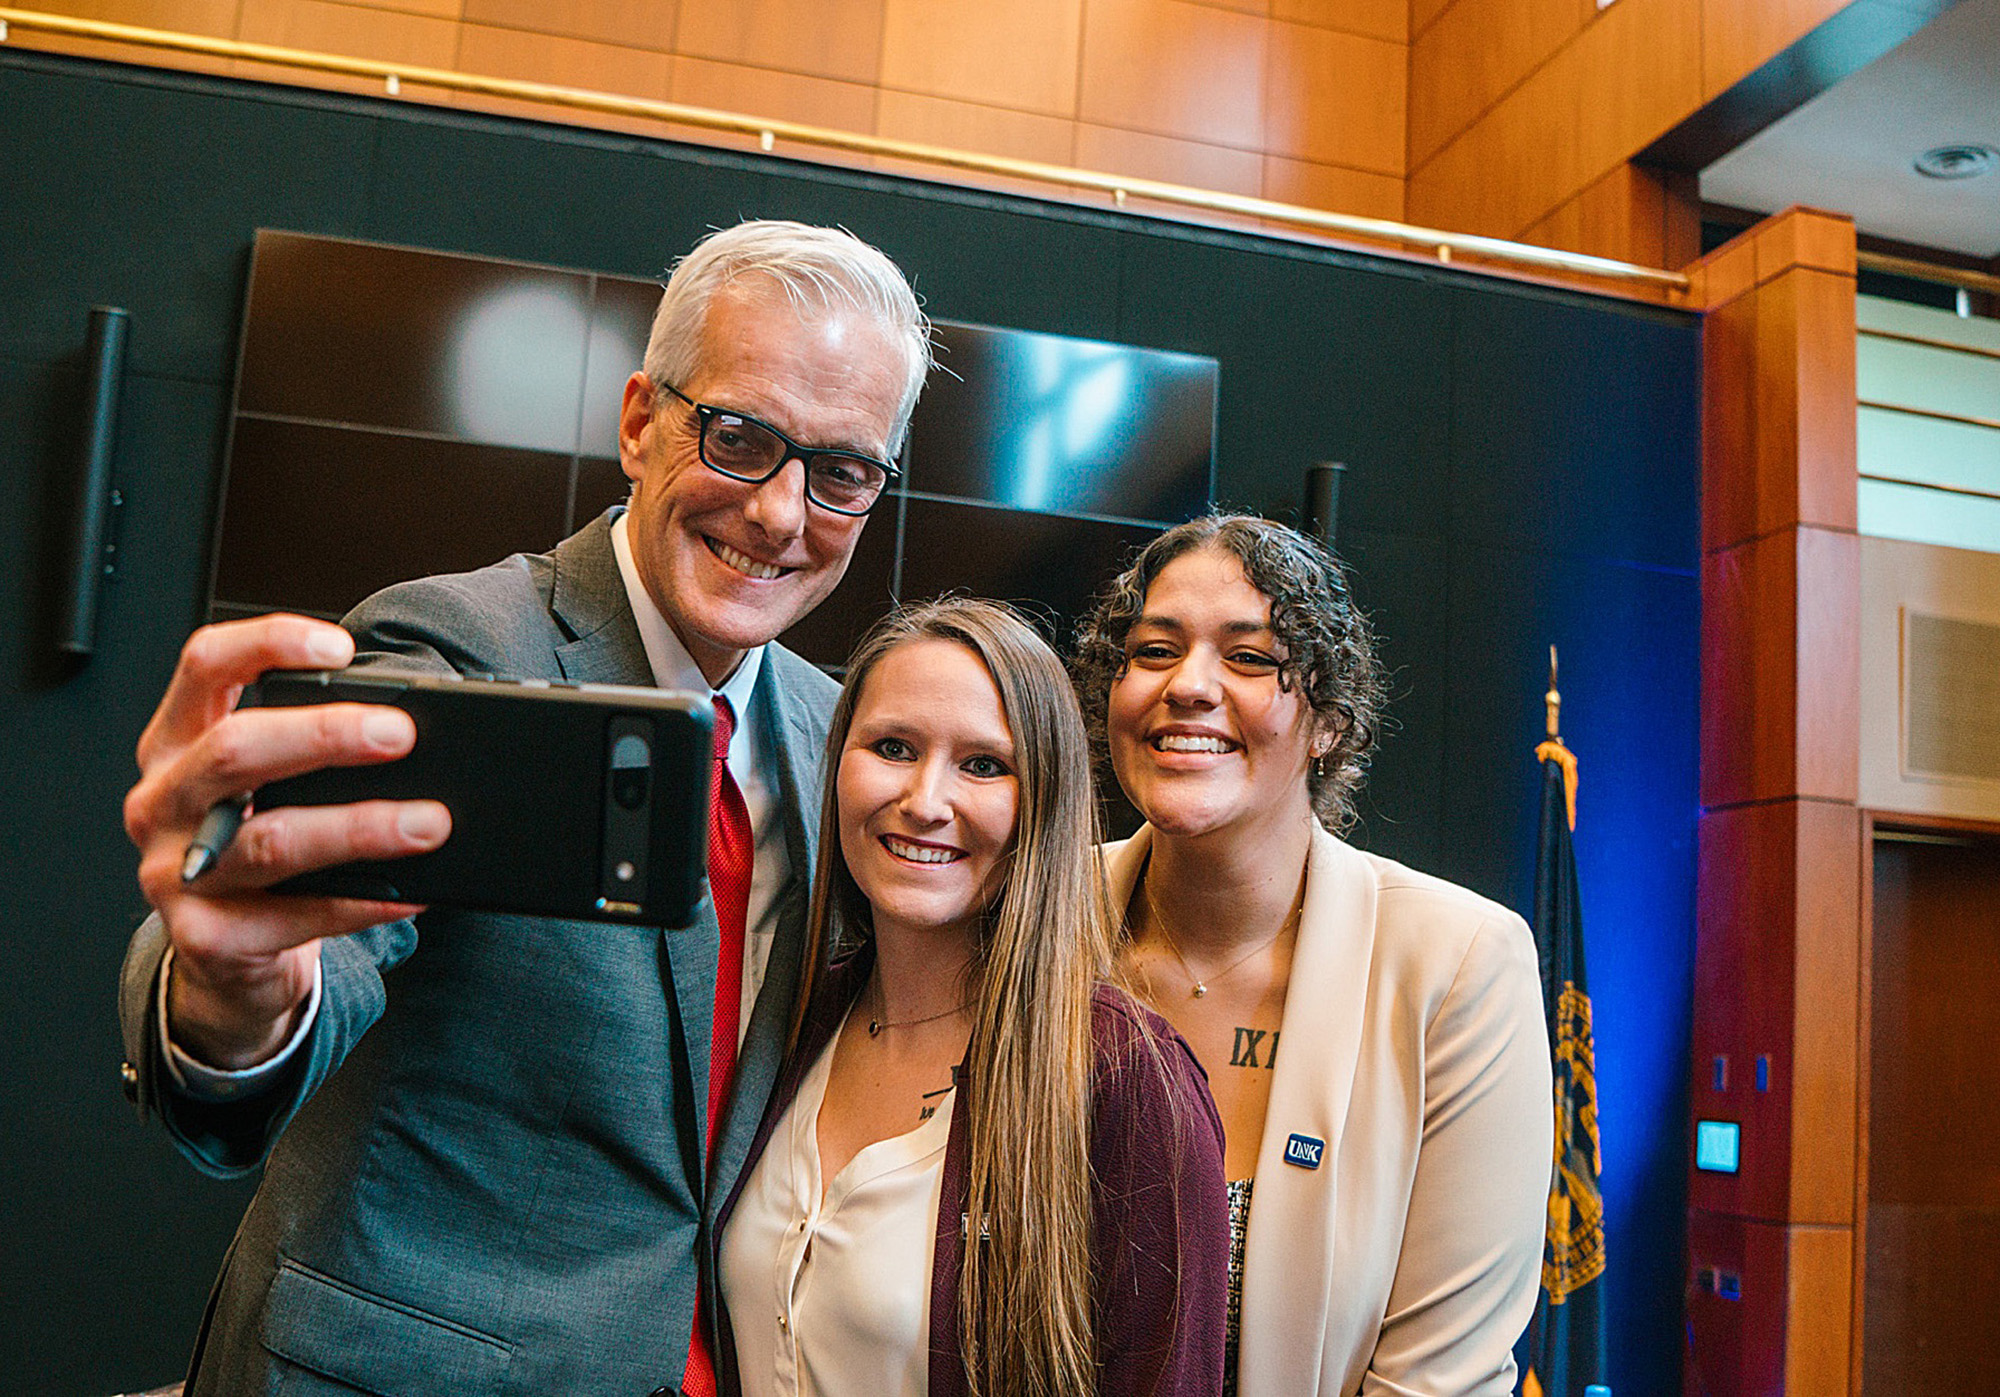 UNK students Courtney Larsen, center, and Tiffany Sauls, right, take a photo with U.S. Secretary of Veterans Affairs Denis McDonough during an event last month.